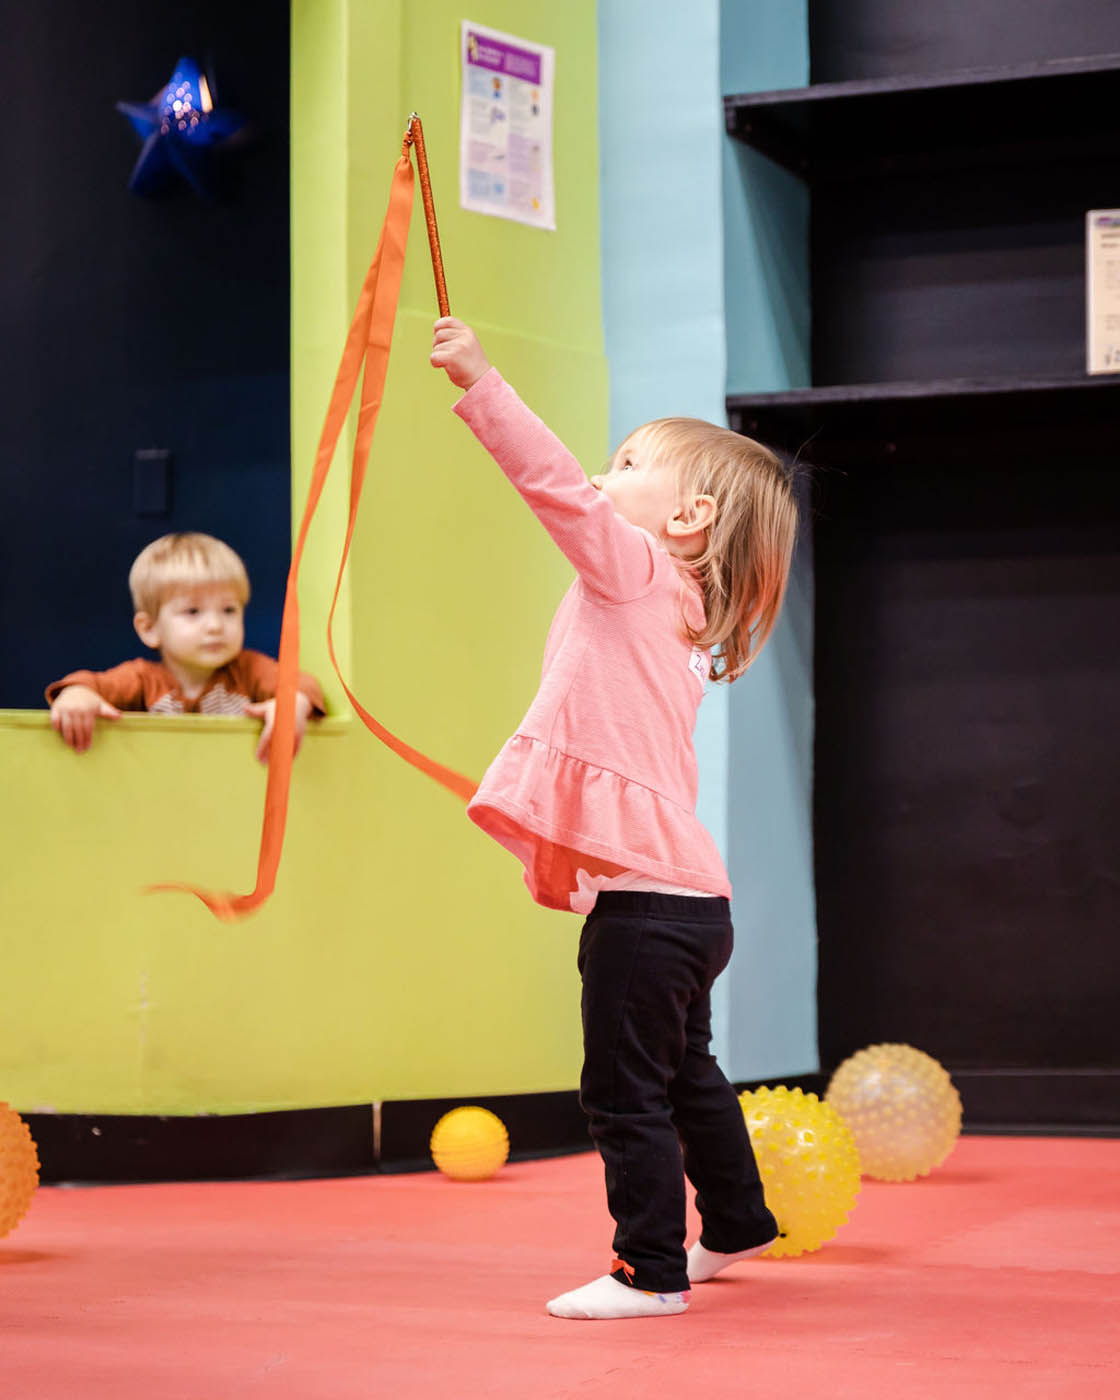 A little girl playing with ribbons and increasing her motor skills in sports classes with Romp n' Roll Katy.